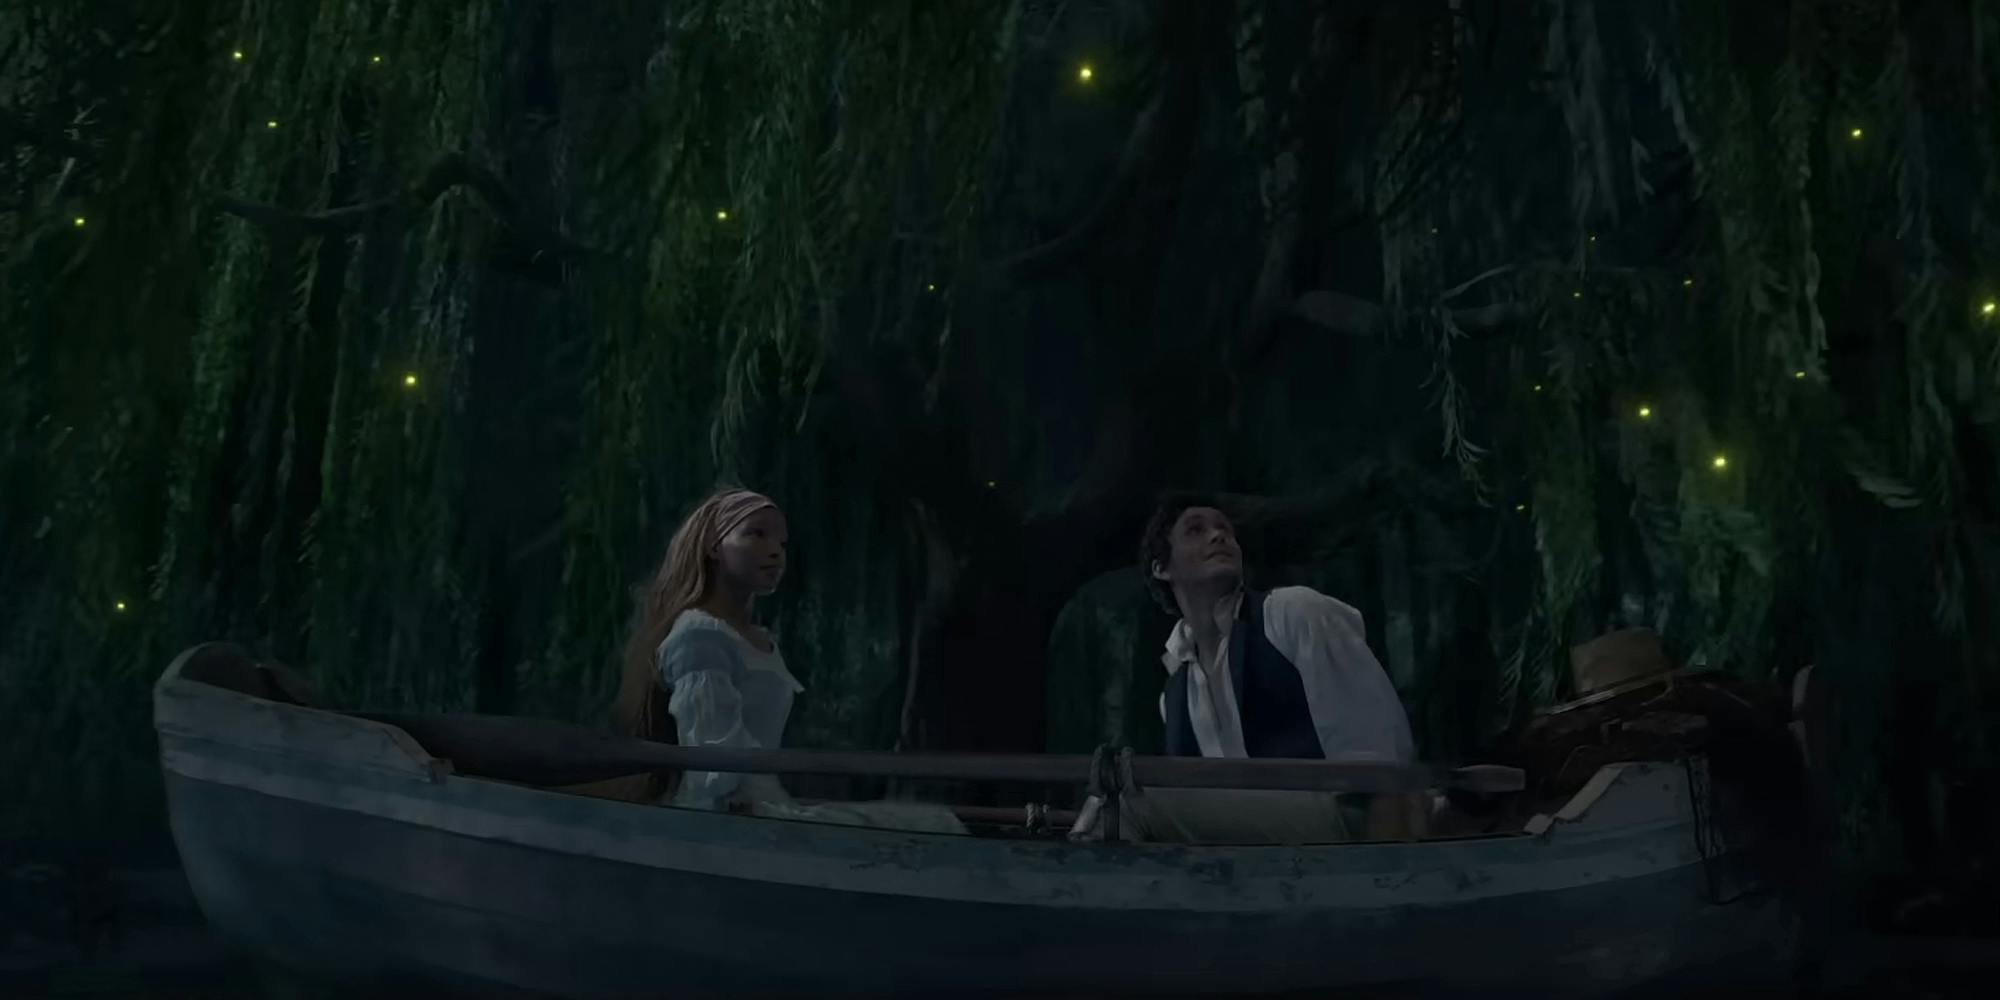 The Little Mermaid: Every Song In 2023 Remake, Ranked Worst to Best